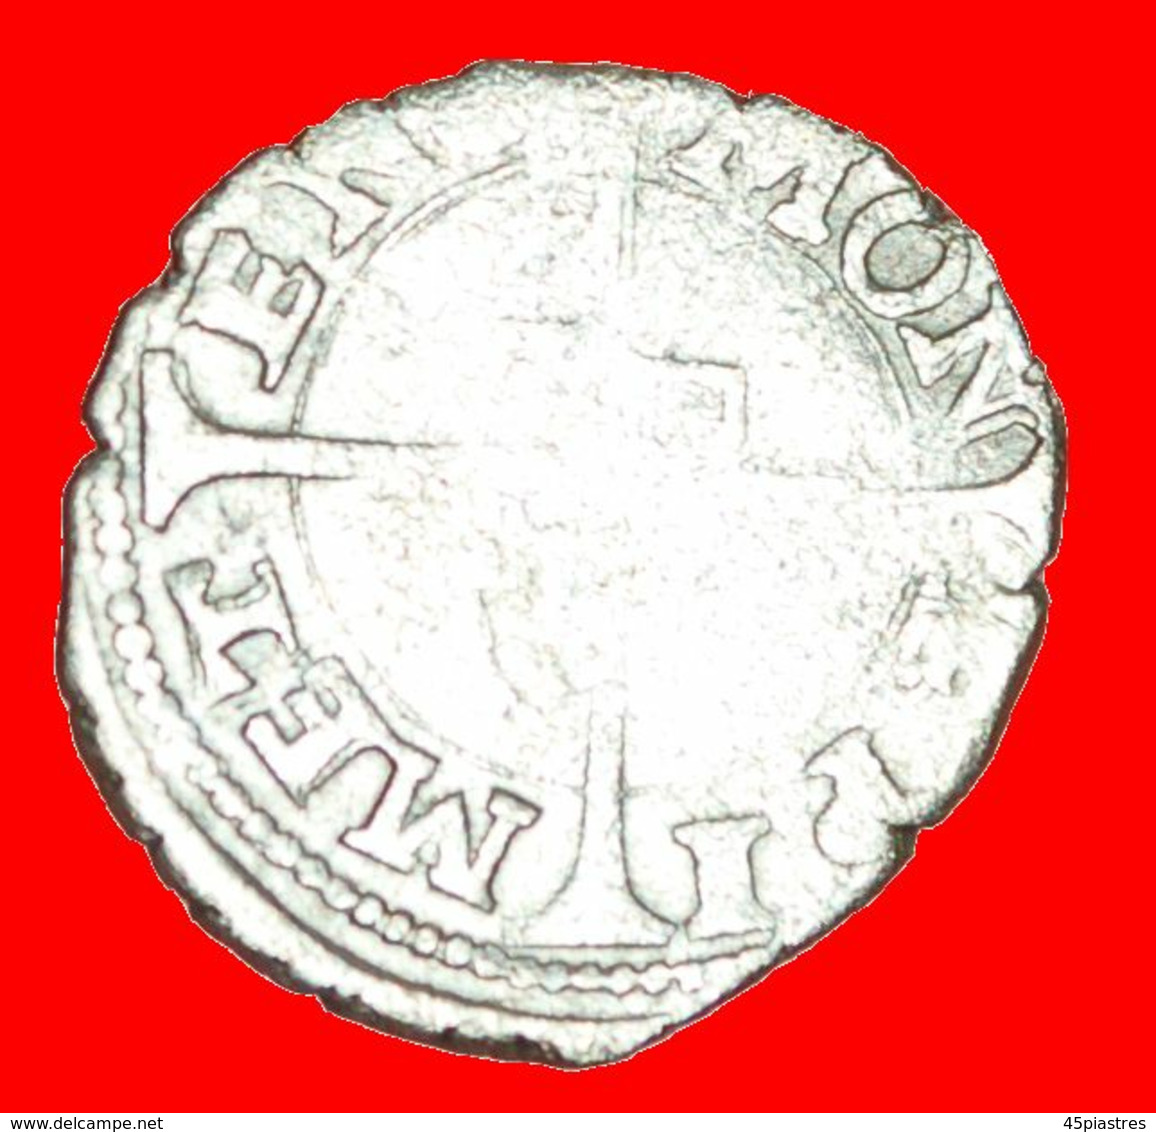 * METZ LORRAINE: FRANCE★BUGNE (1551-1555)! DISCOVERY COIN★ MEDAL ALIGNMENT ↑↑! RECENTLY PUBLISHED★LOW START★ NO RESERVE! - Errores Y Curiosidades